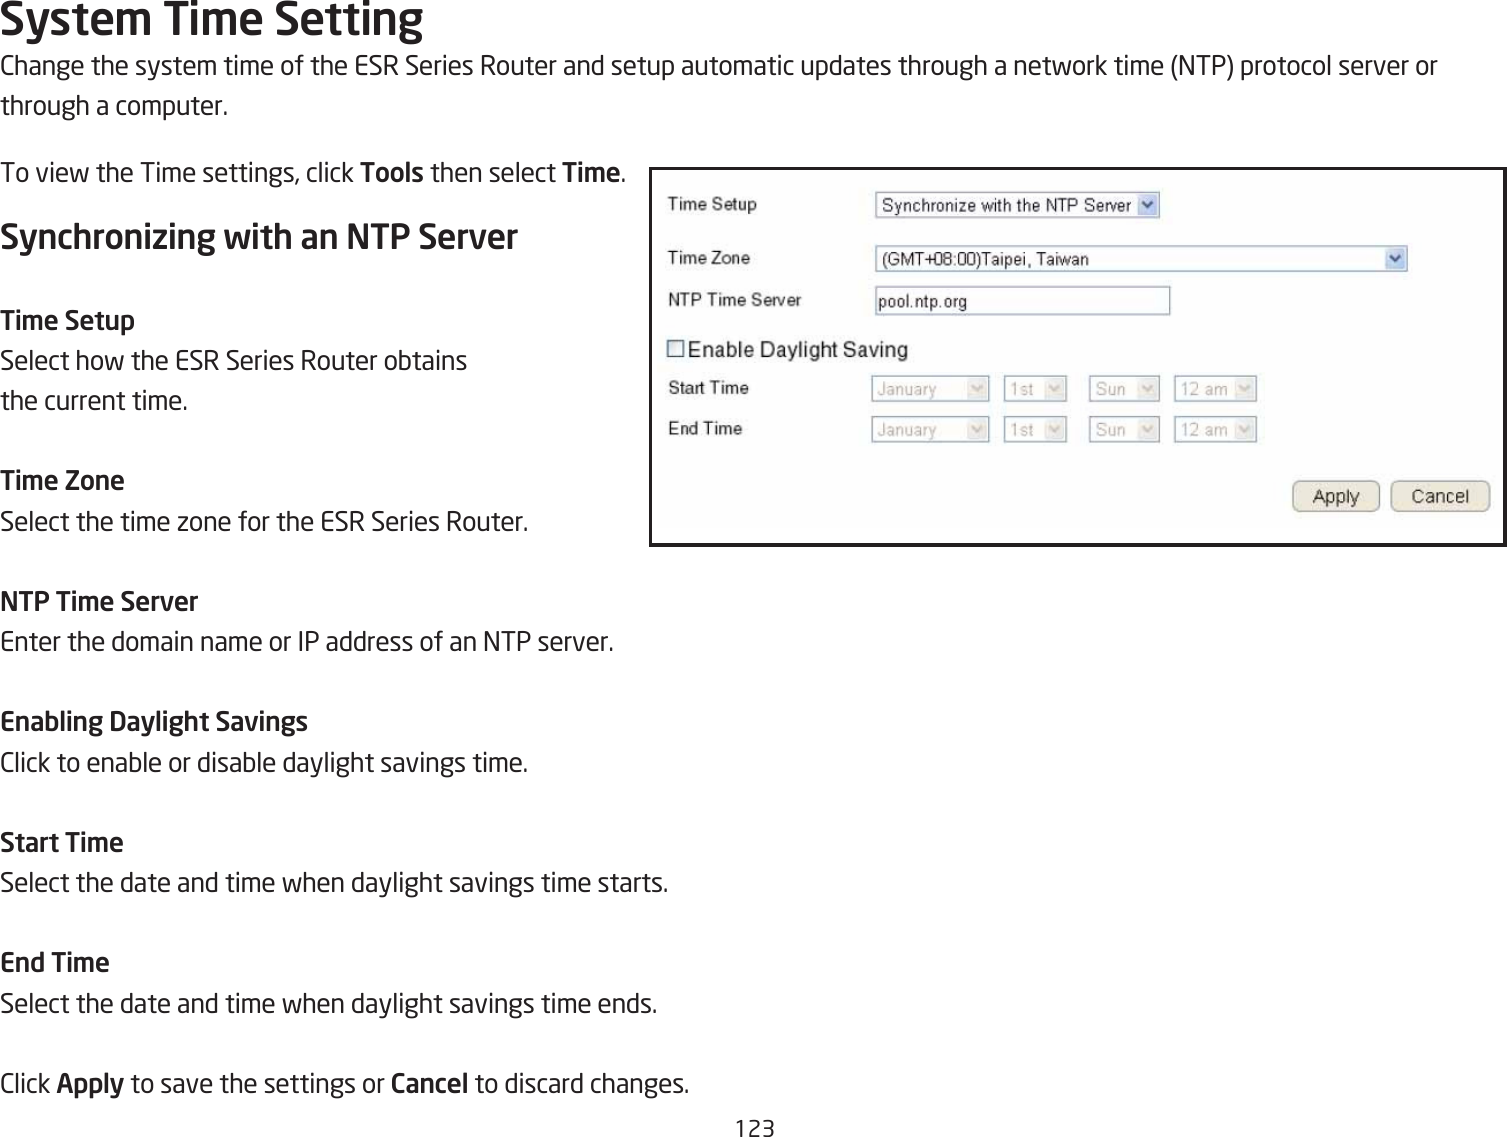 123Syste\ Ti\e Setting2hange the system time of the ESR Series Router and setup automatic updates through a netfork time =TP protocol server orthrough a computer.To vief the Time settings, click Tools then select Ti\e.Synchronizing with an NTP ServerTi\e SetupSelect hof the ESR Series Router oQtains the current time.Ti\e ZoneSelect the time ione for the ESR Series Router.NTP Ti\e ServerEnter the domain name or IP address of an =TP server.Enabling Daylight Savings2lick to enaQle or disaQle daylight savings time.Start Ti\eSelect the date and time fhen daylight savings time starts.End Ti\eSelect the date and time fhen daylight savings time ends.2lick Apply to save the settings or Cancel to discard changes.